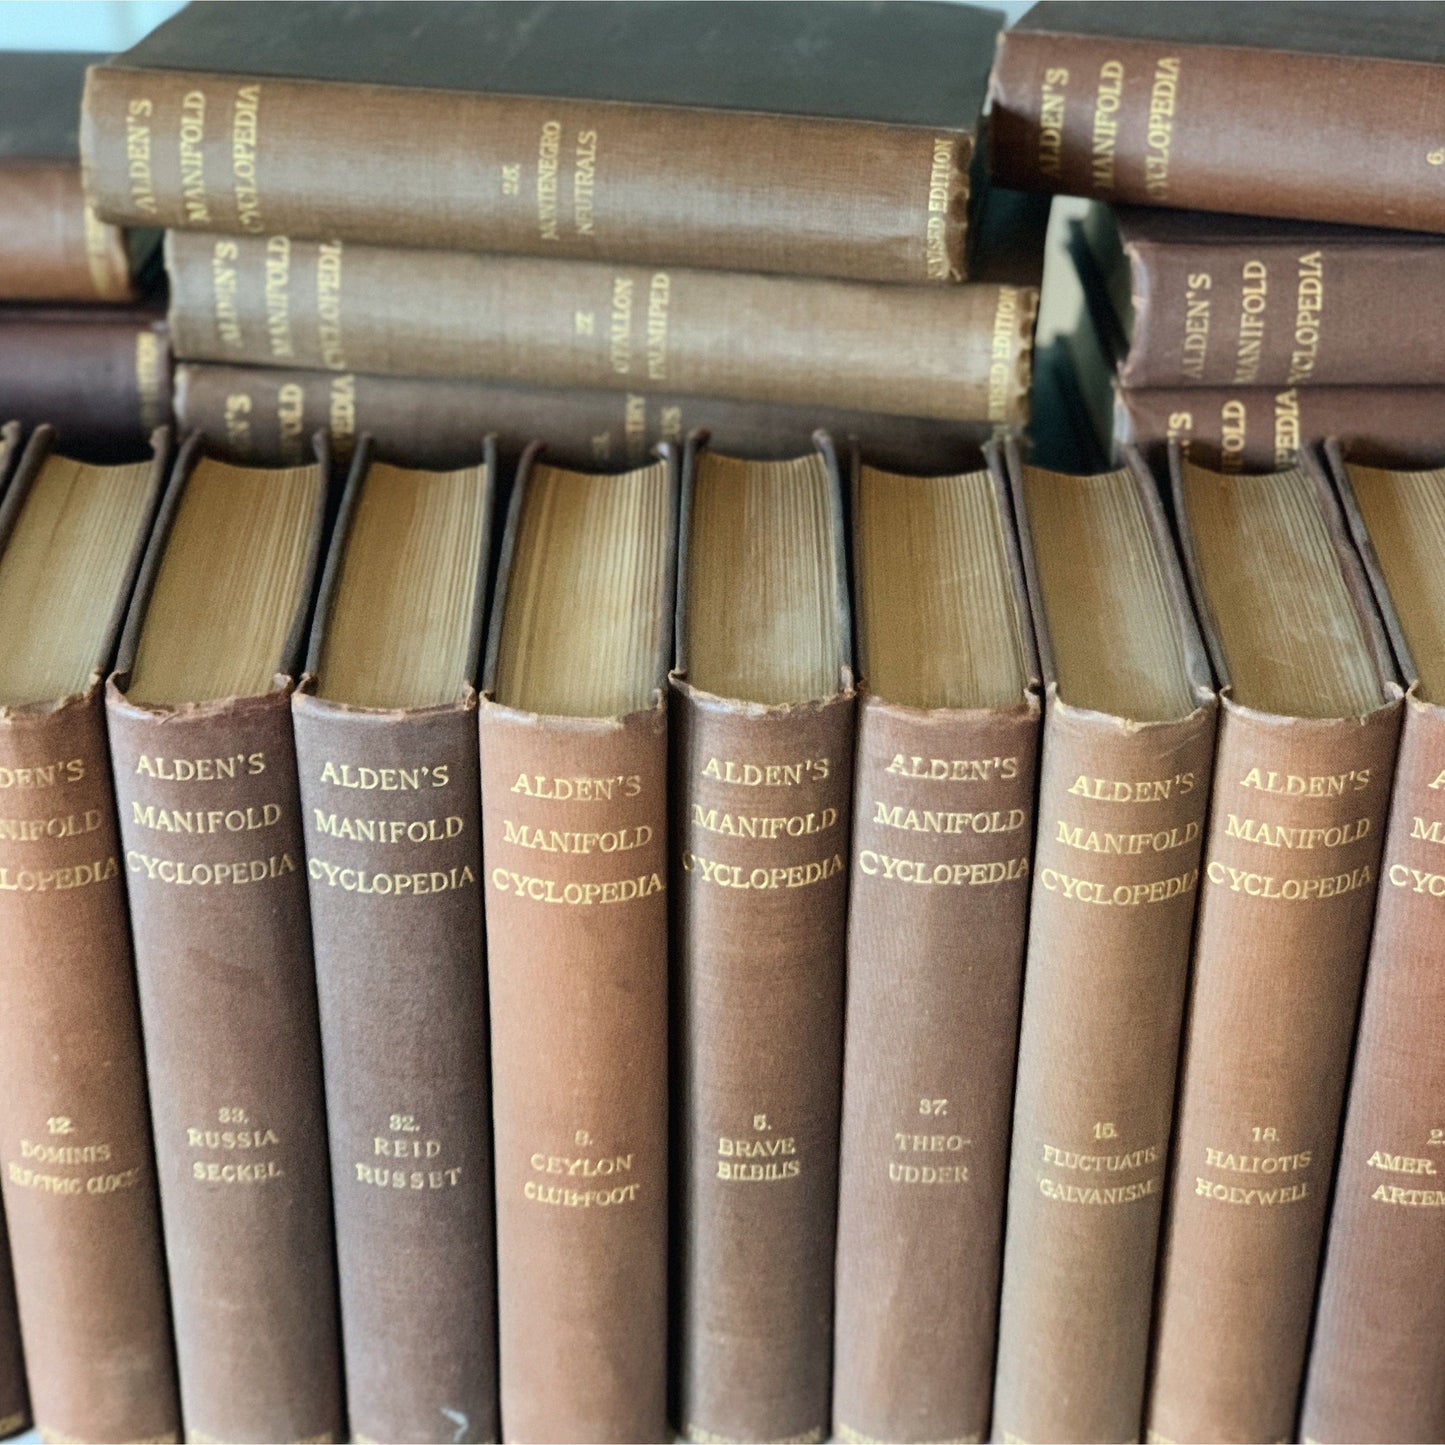 Antique Encyclopedia Set, Alden's Manifold Cyclopedia of Knowledge and Language, 1889 Complete